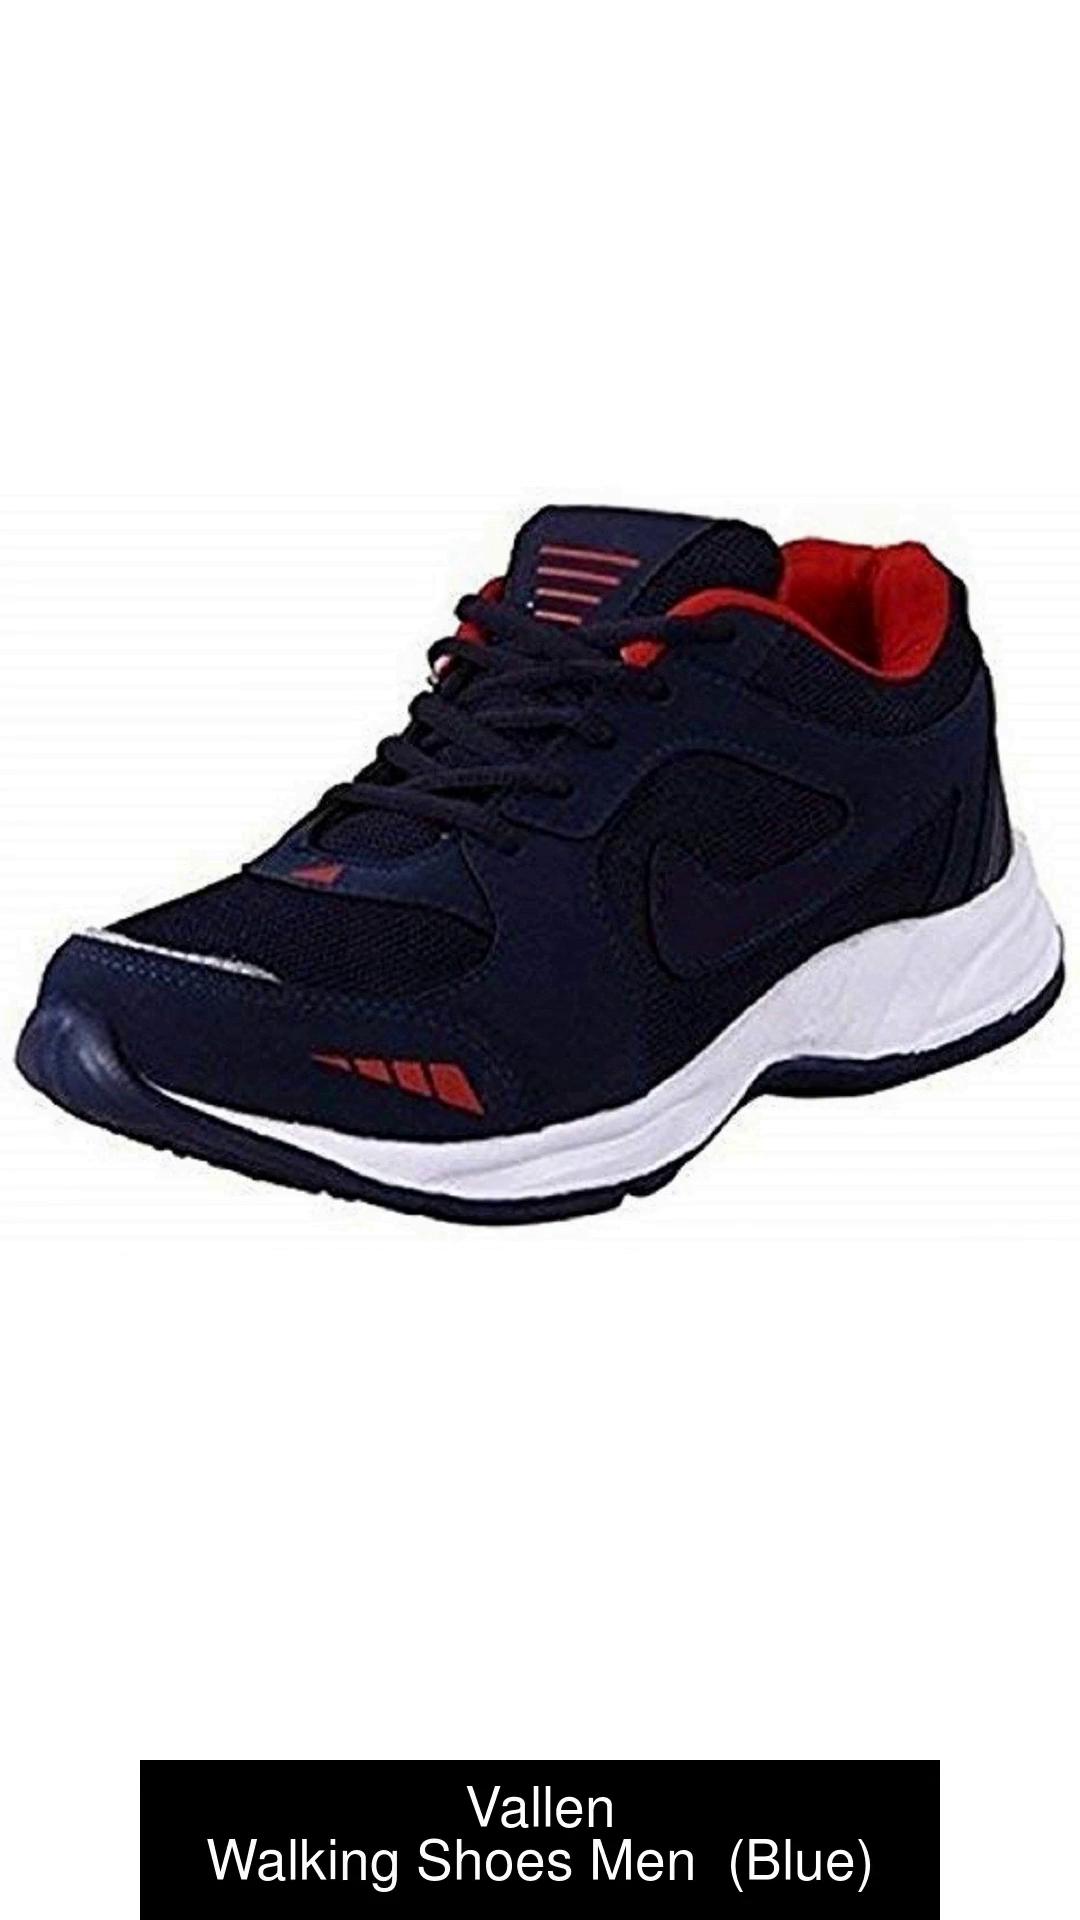 Vallen Sport & Running Shoes Lace Up For Men